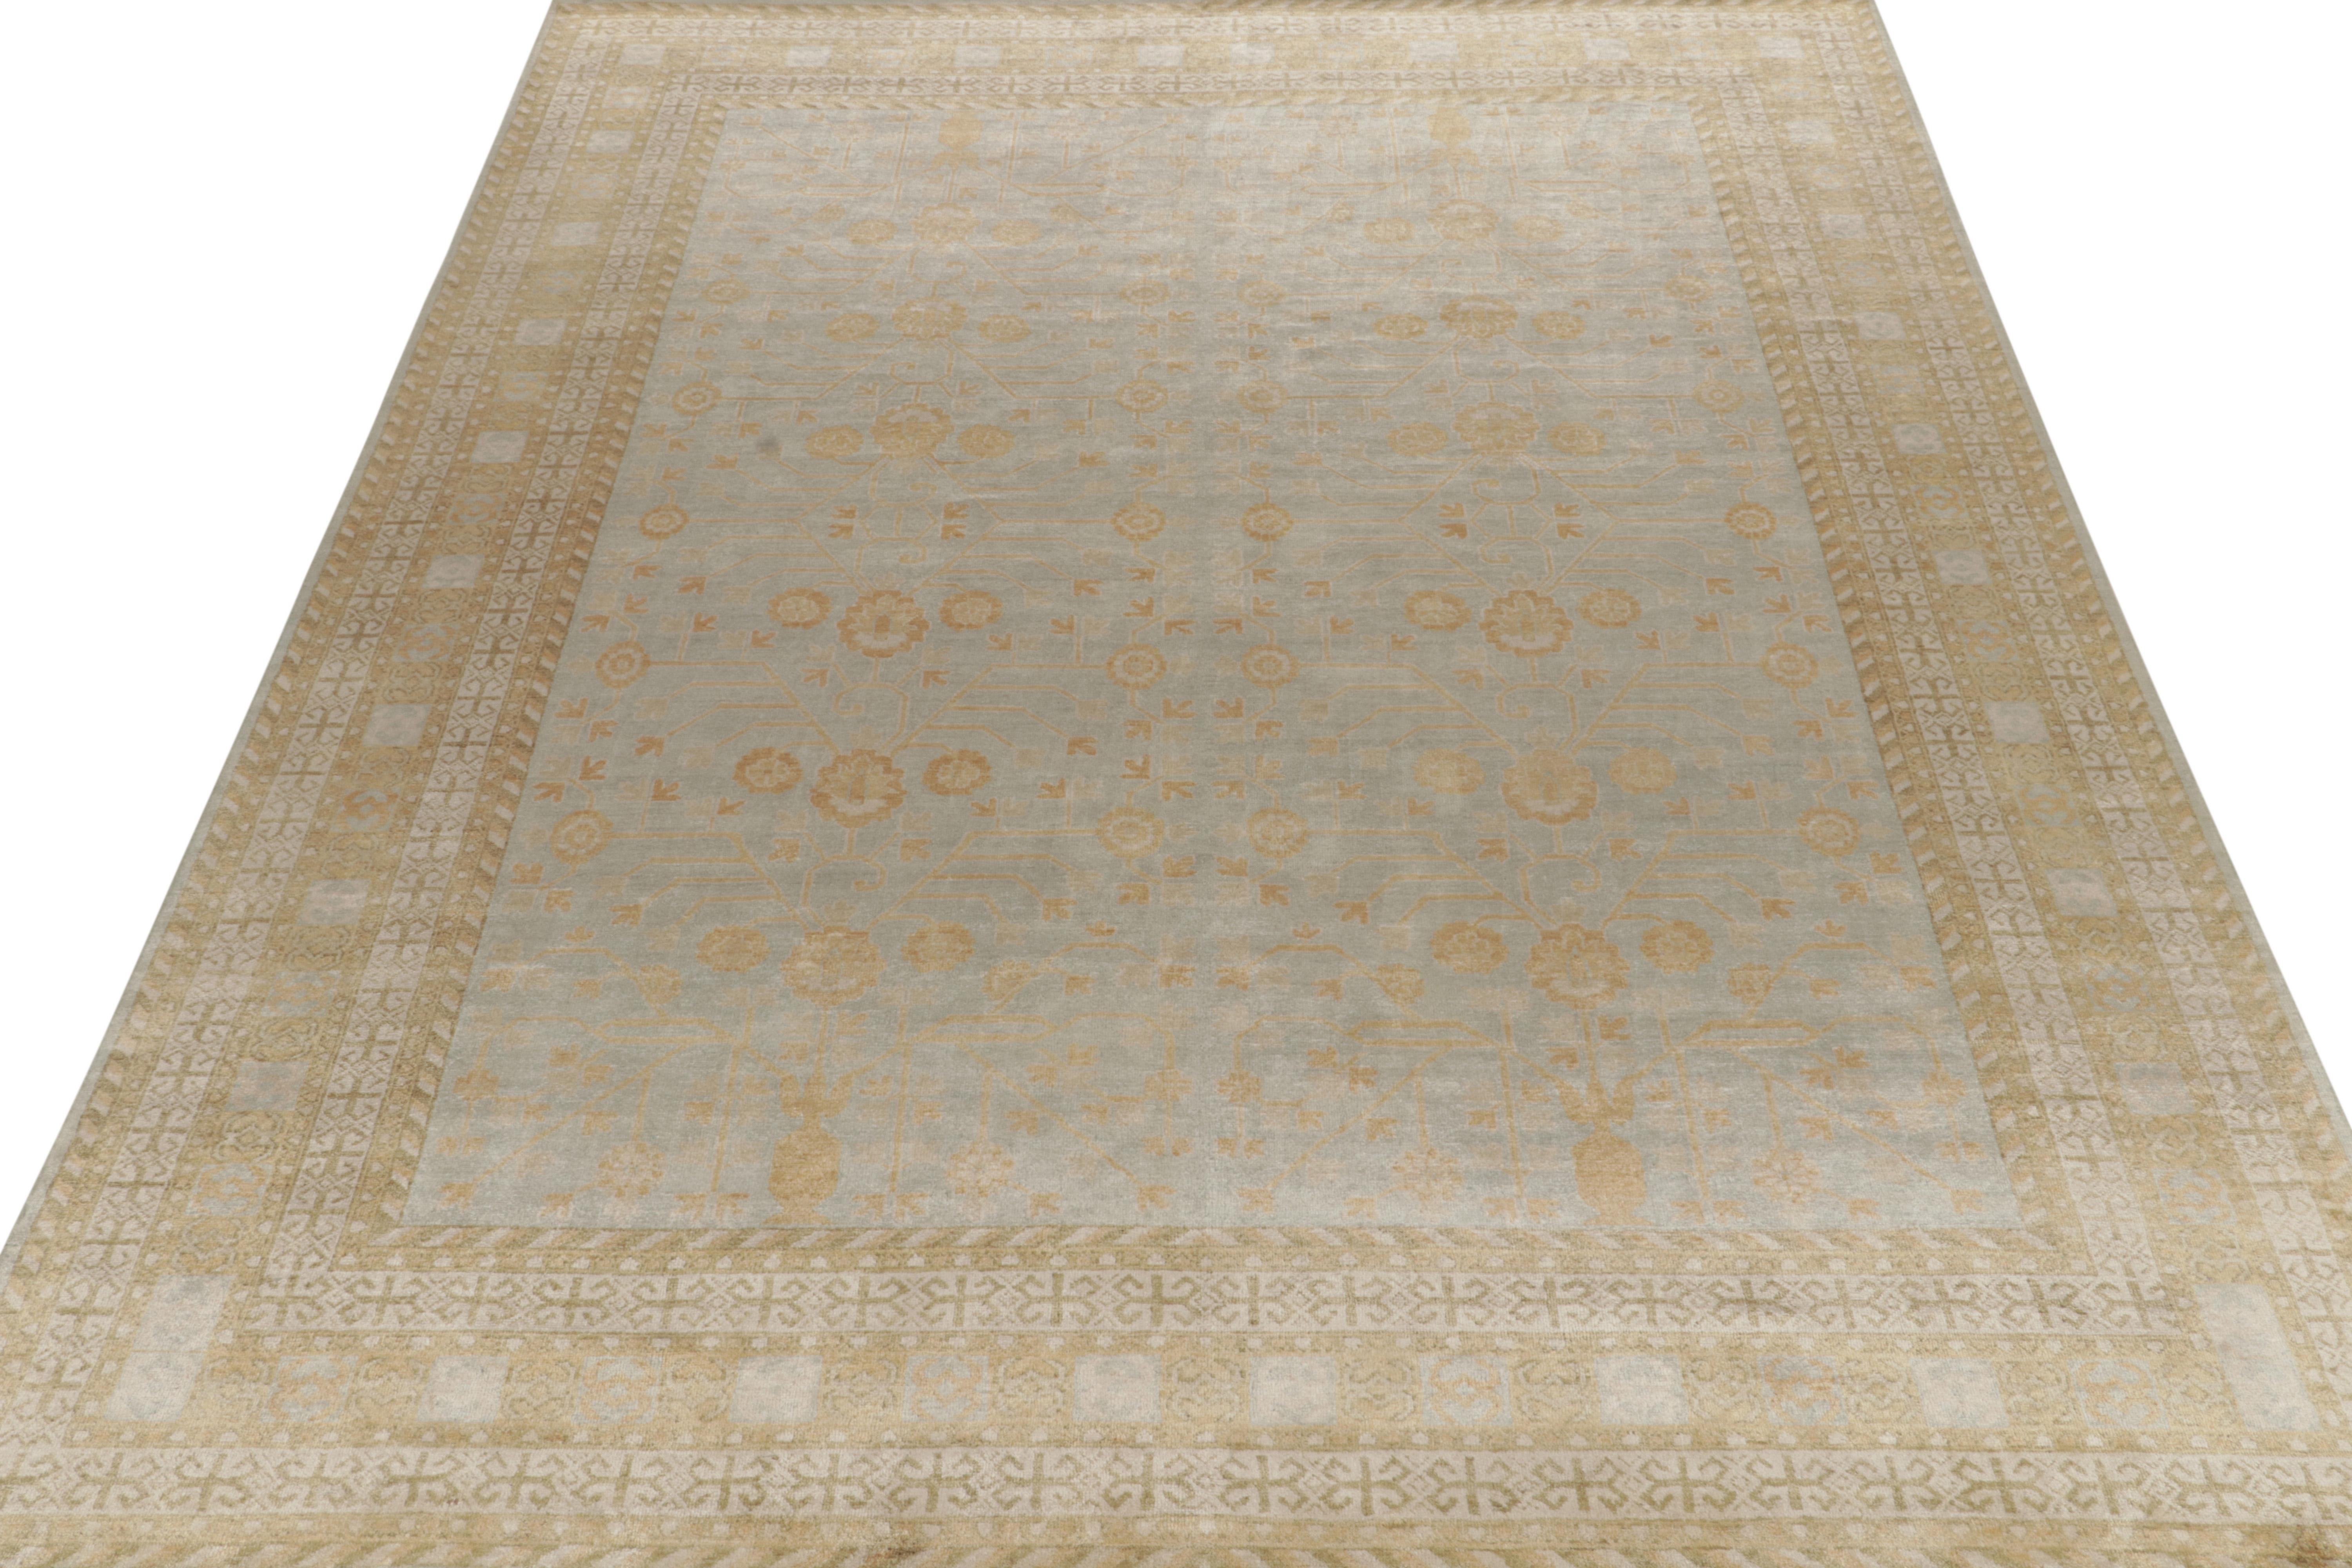 Indian Rug & Kilim’s Khotan style rug in Blue with Beige, Gold Pomegranate Patterns For Sale